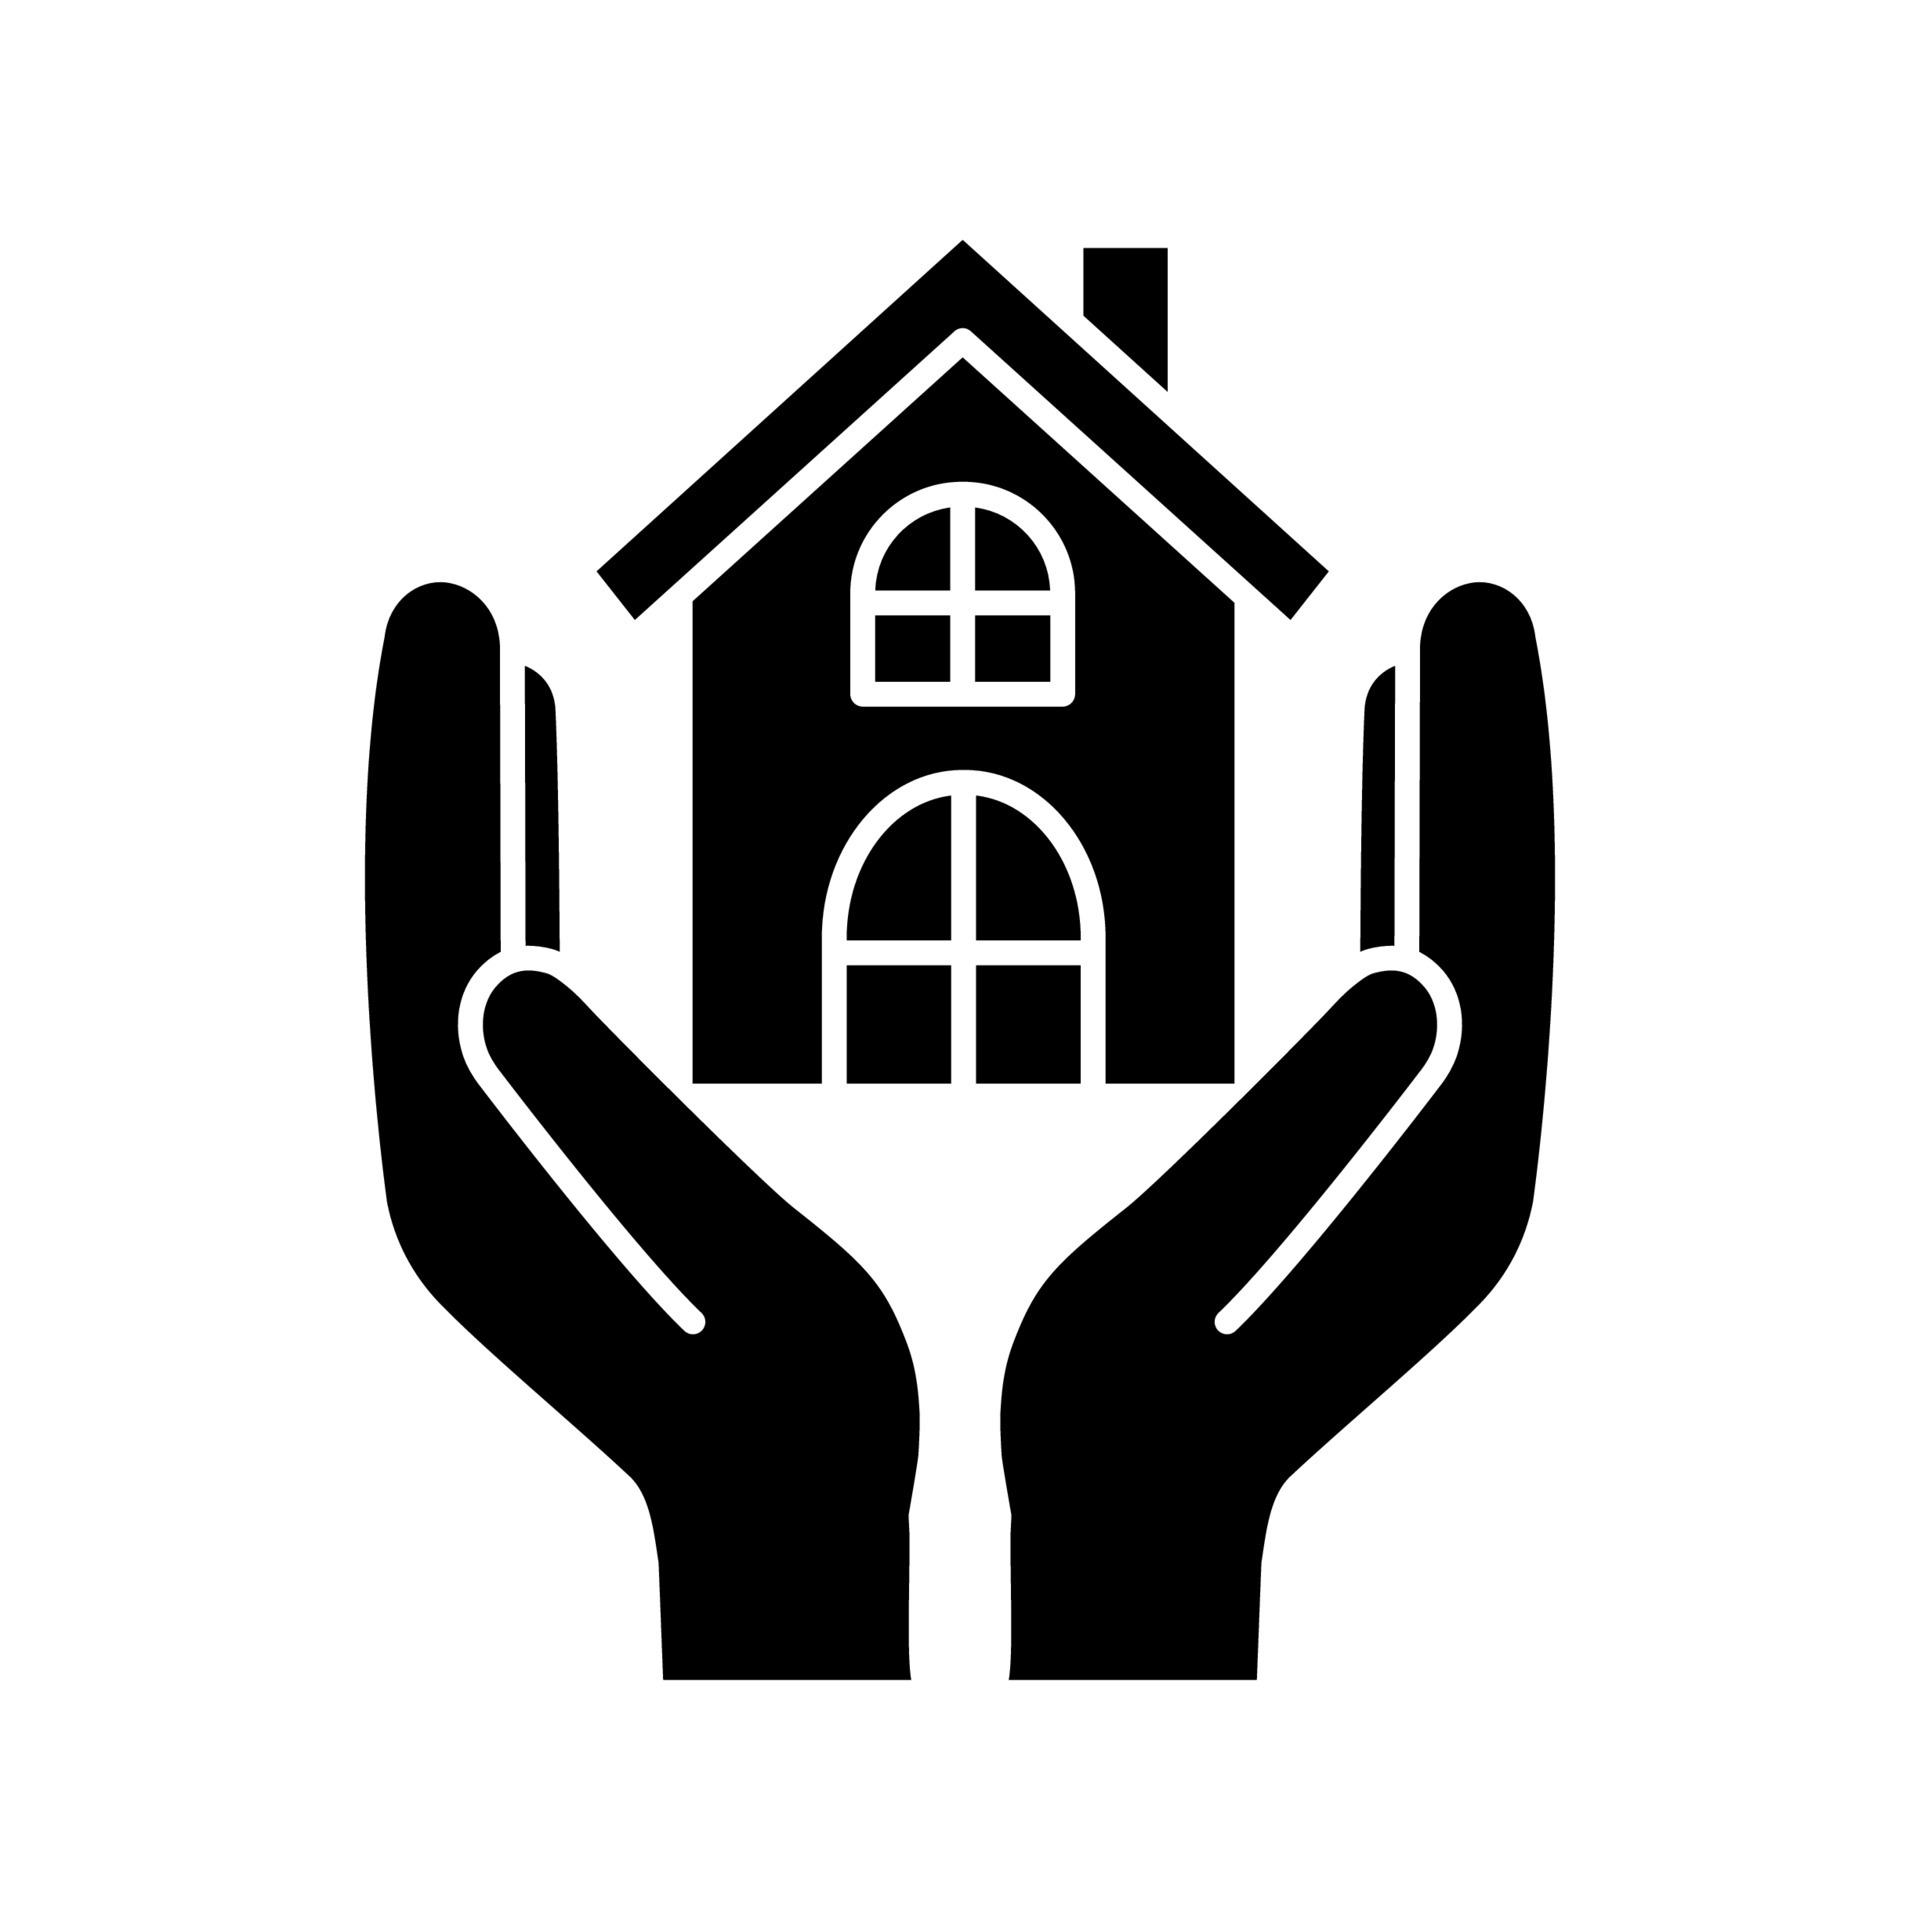 Affordable housing glyph icon. Silhouette symbol. Shelter for